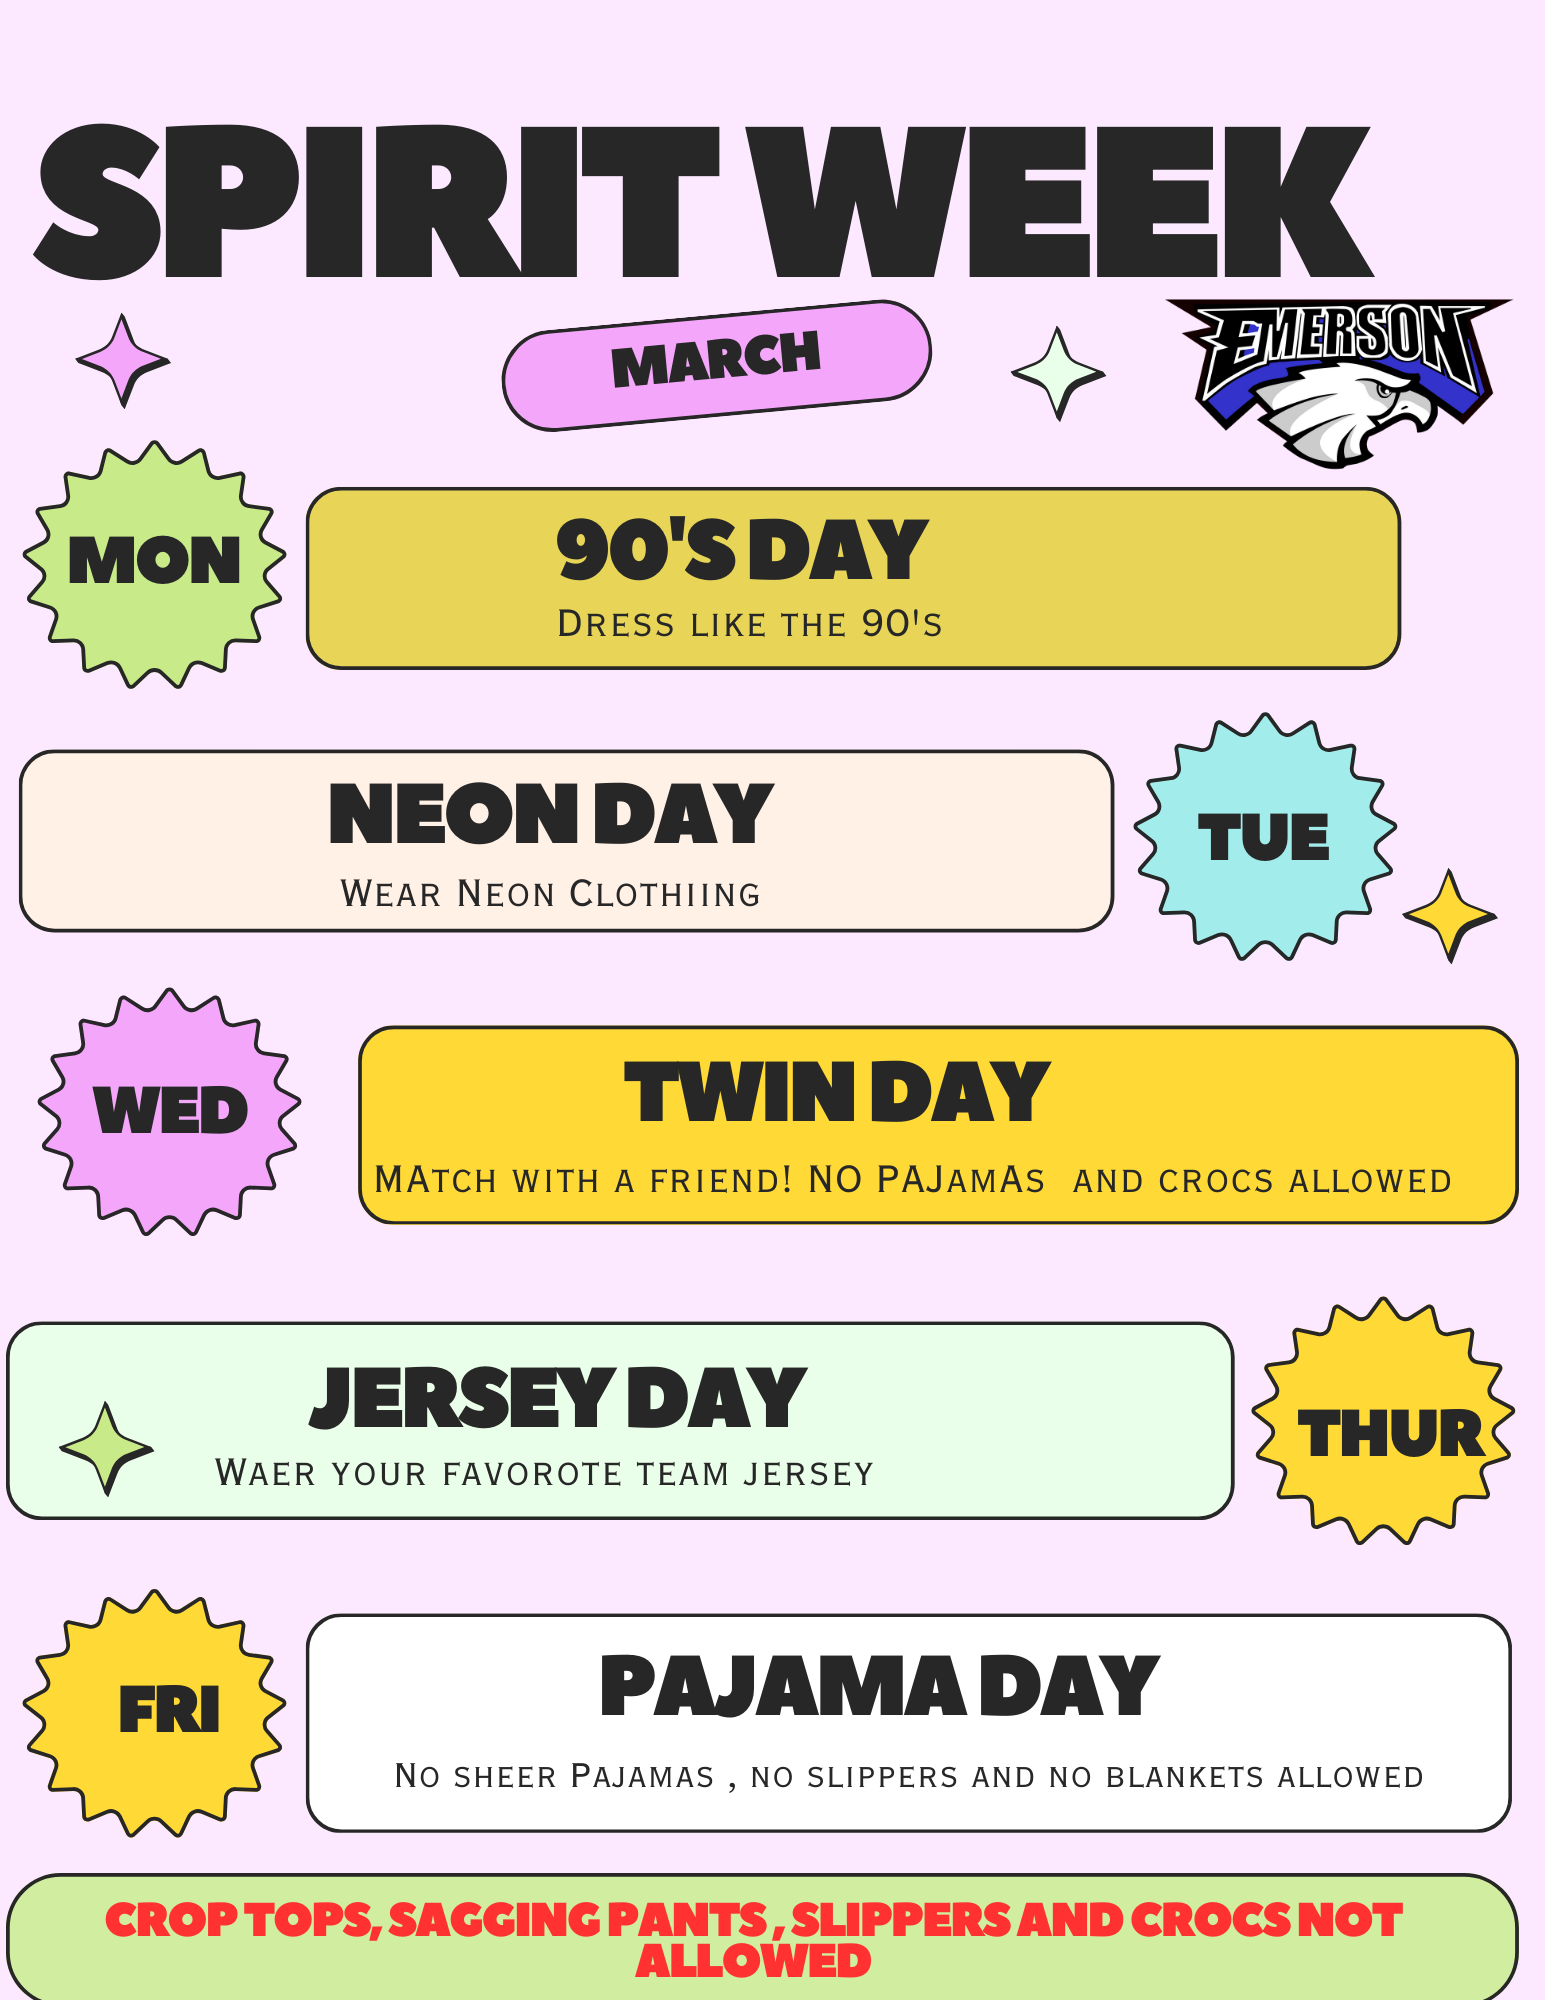 March Spirit Week March 25th to March 29th